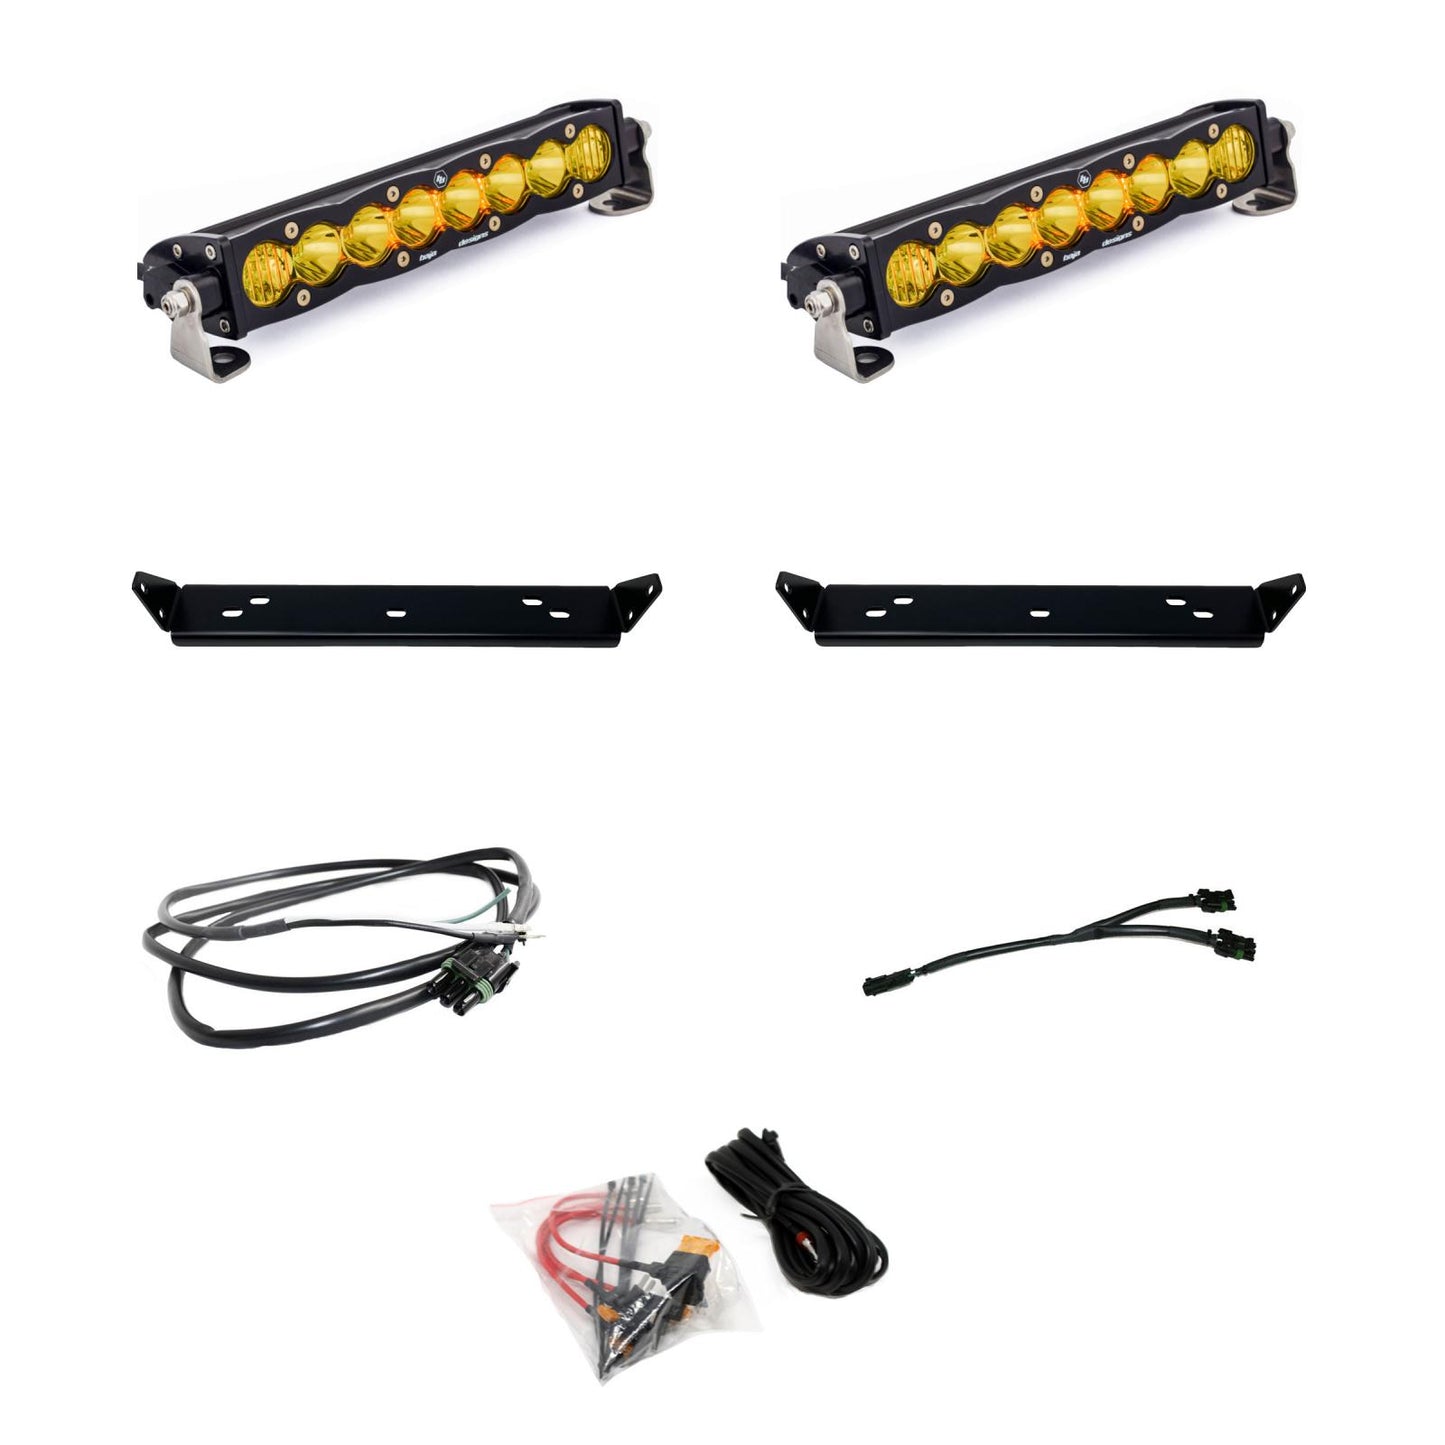 Baja Designs Ford S8 10 Inch Dual Behind Grille Light Bar Kit - Ford 2021-22 F-150; NOTE: Raptor